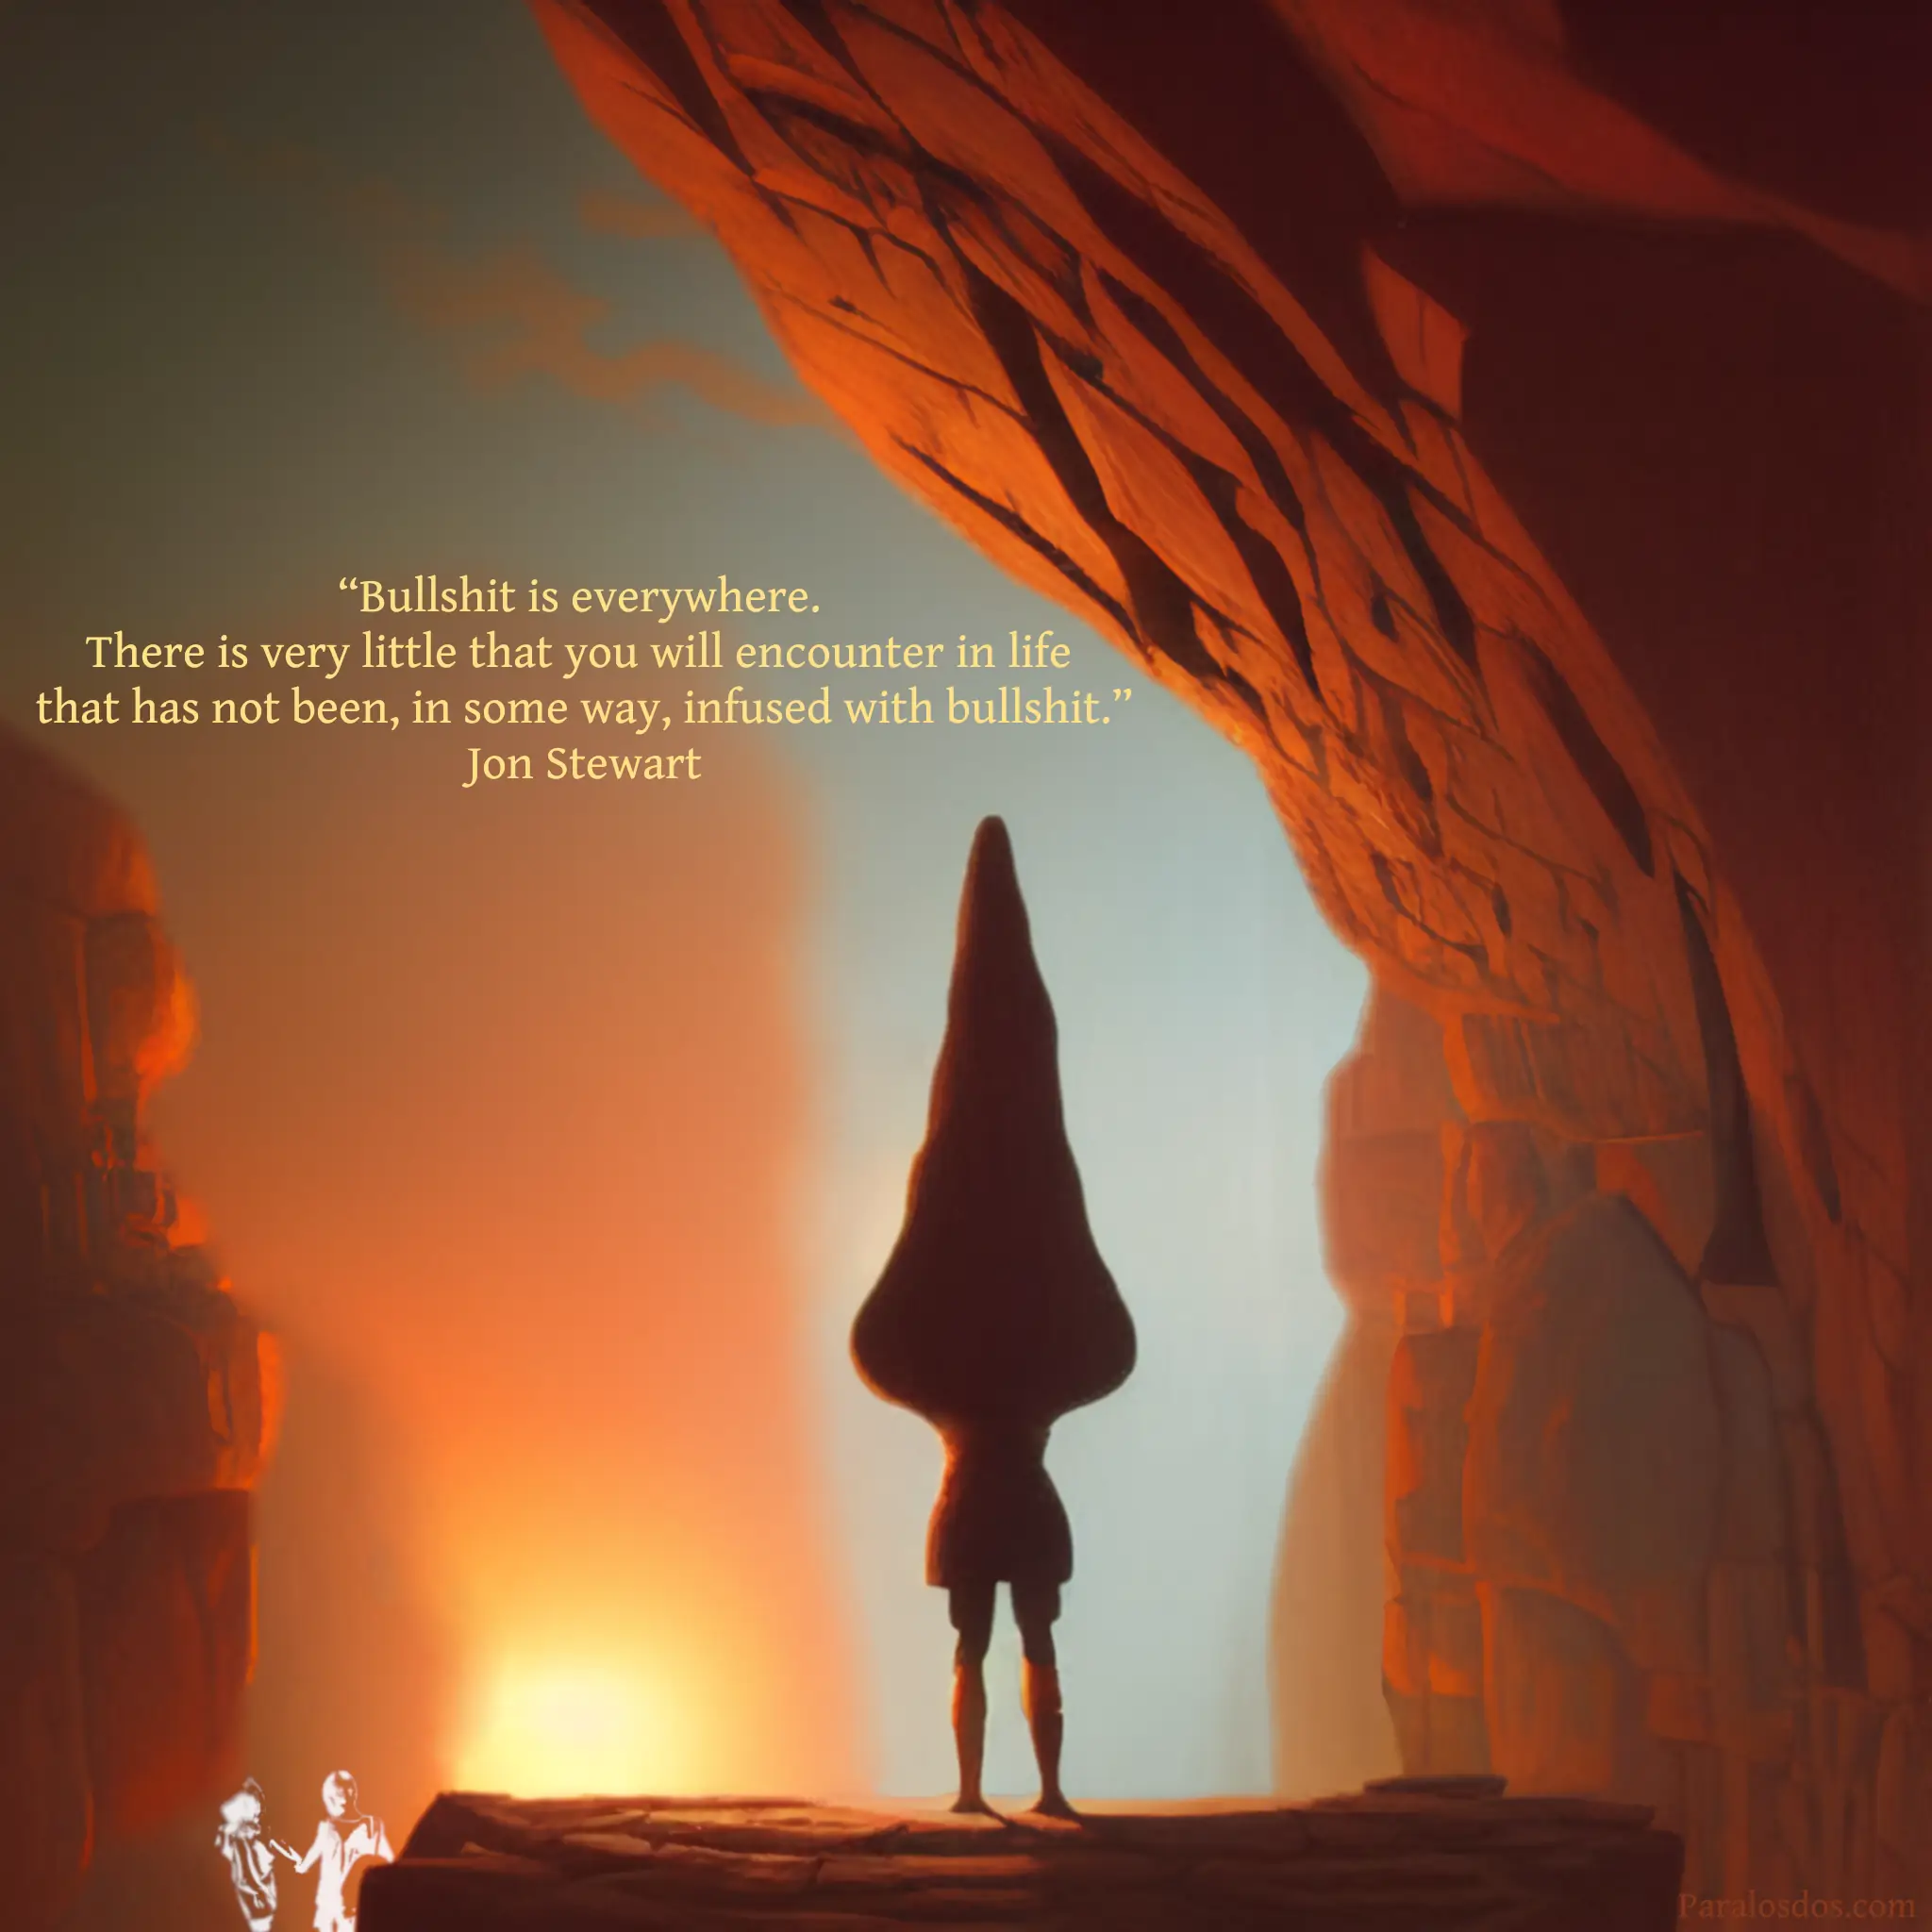 An artistic rendering of a figure standing on the edge of a canyon and looking out at a sunrise. The quote reads: “Bullshit is everywhere. There is very little that you will encounter in life that has not been, in some way, infused with bullshit.” Jon Stewart